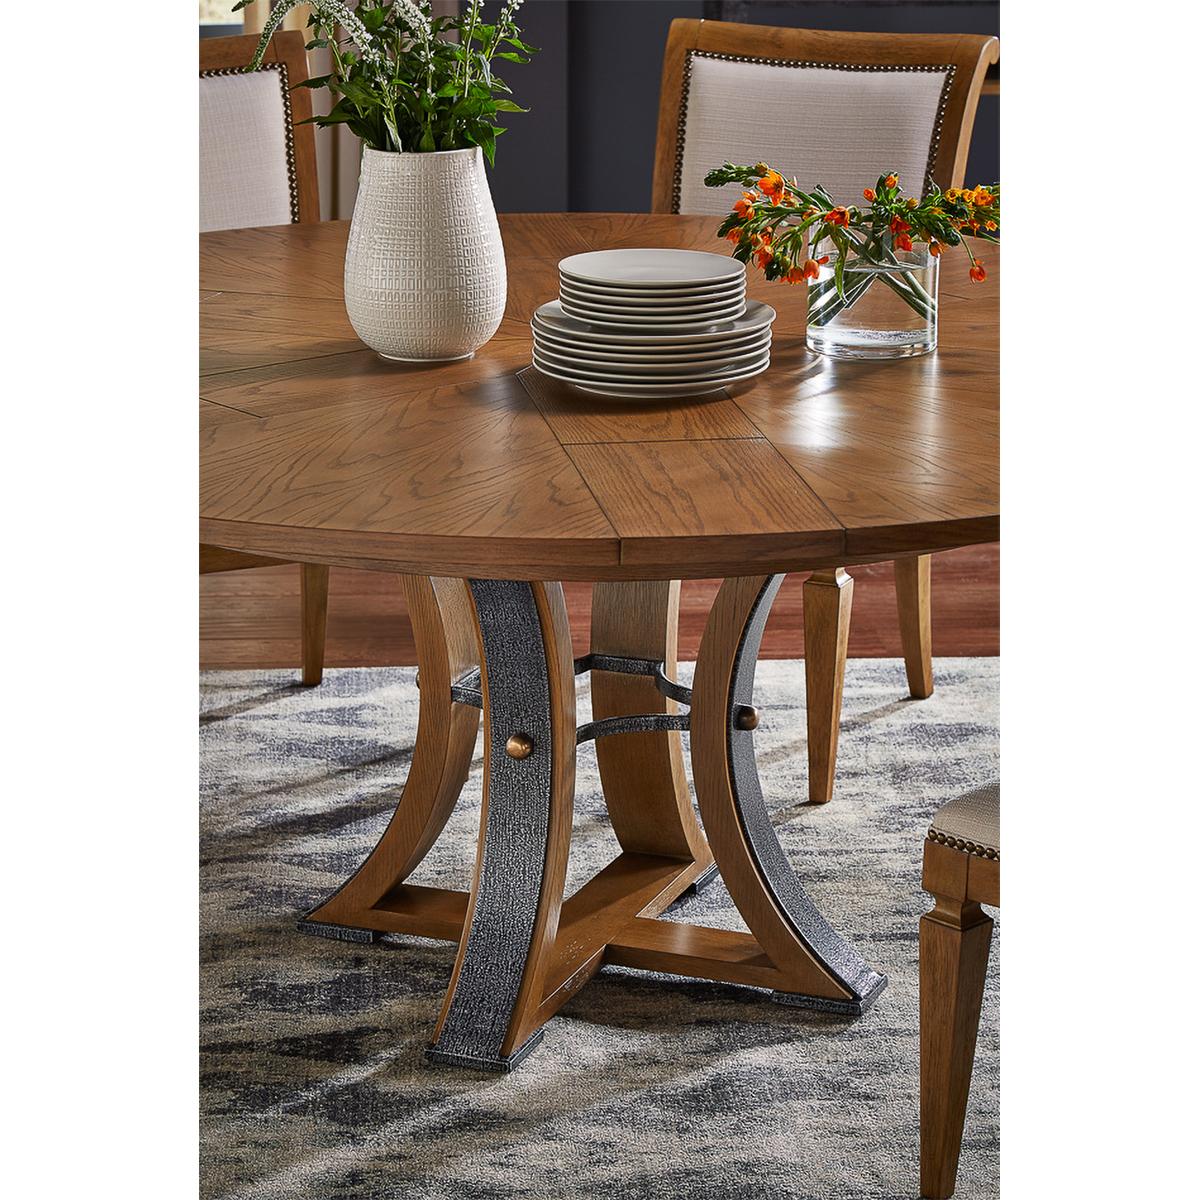 Contemporary Modern Industrial Round Dining Table - 70 - Heather Grey For Sale